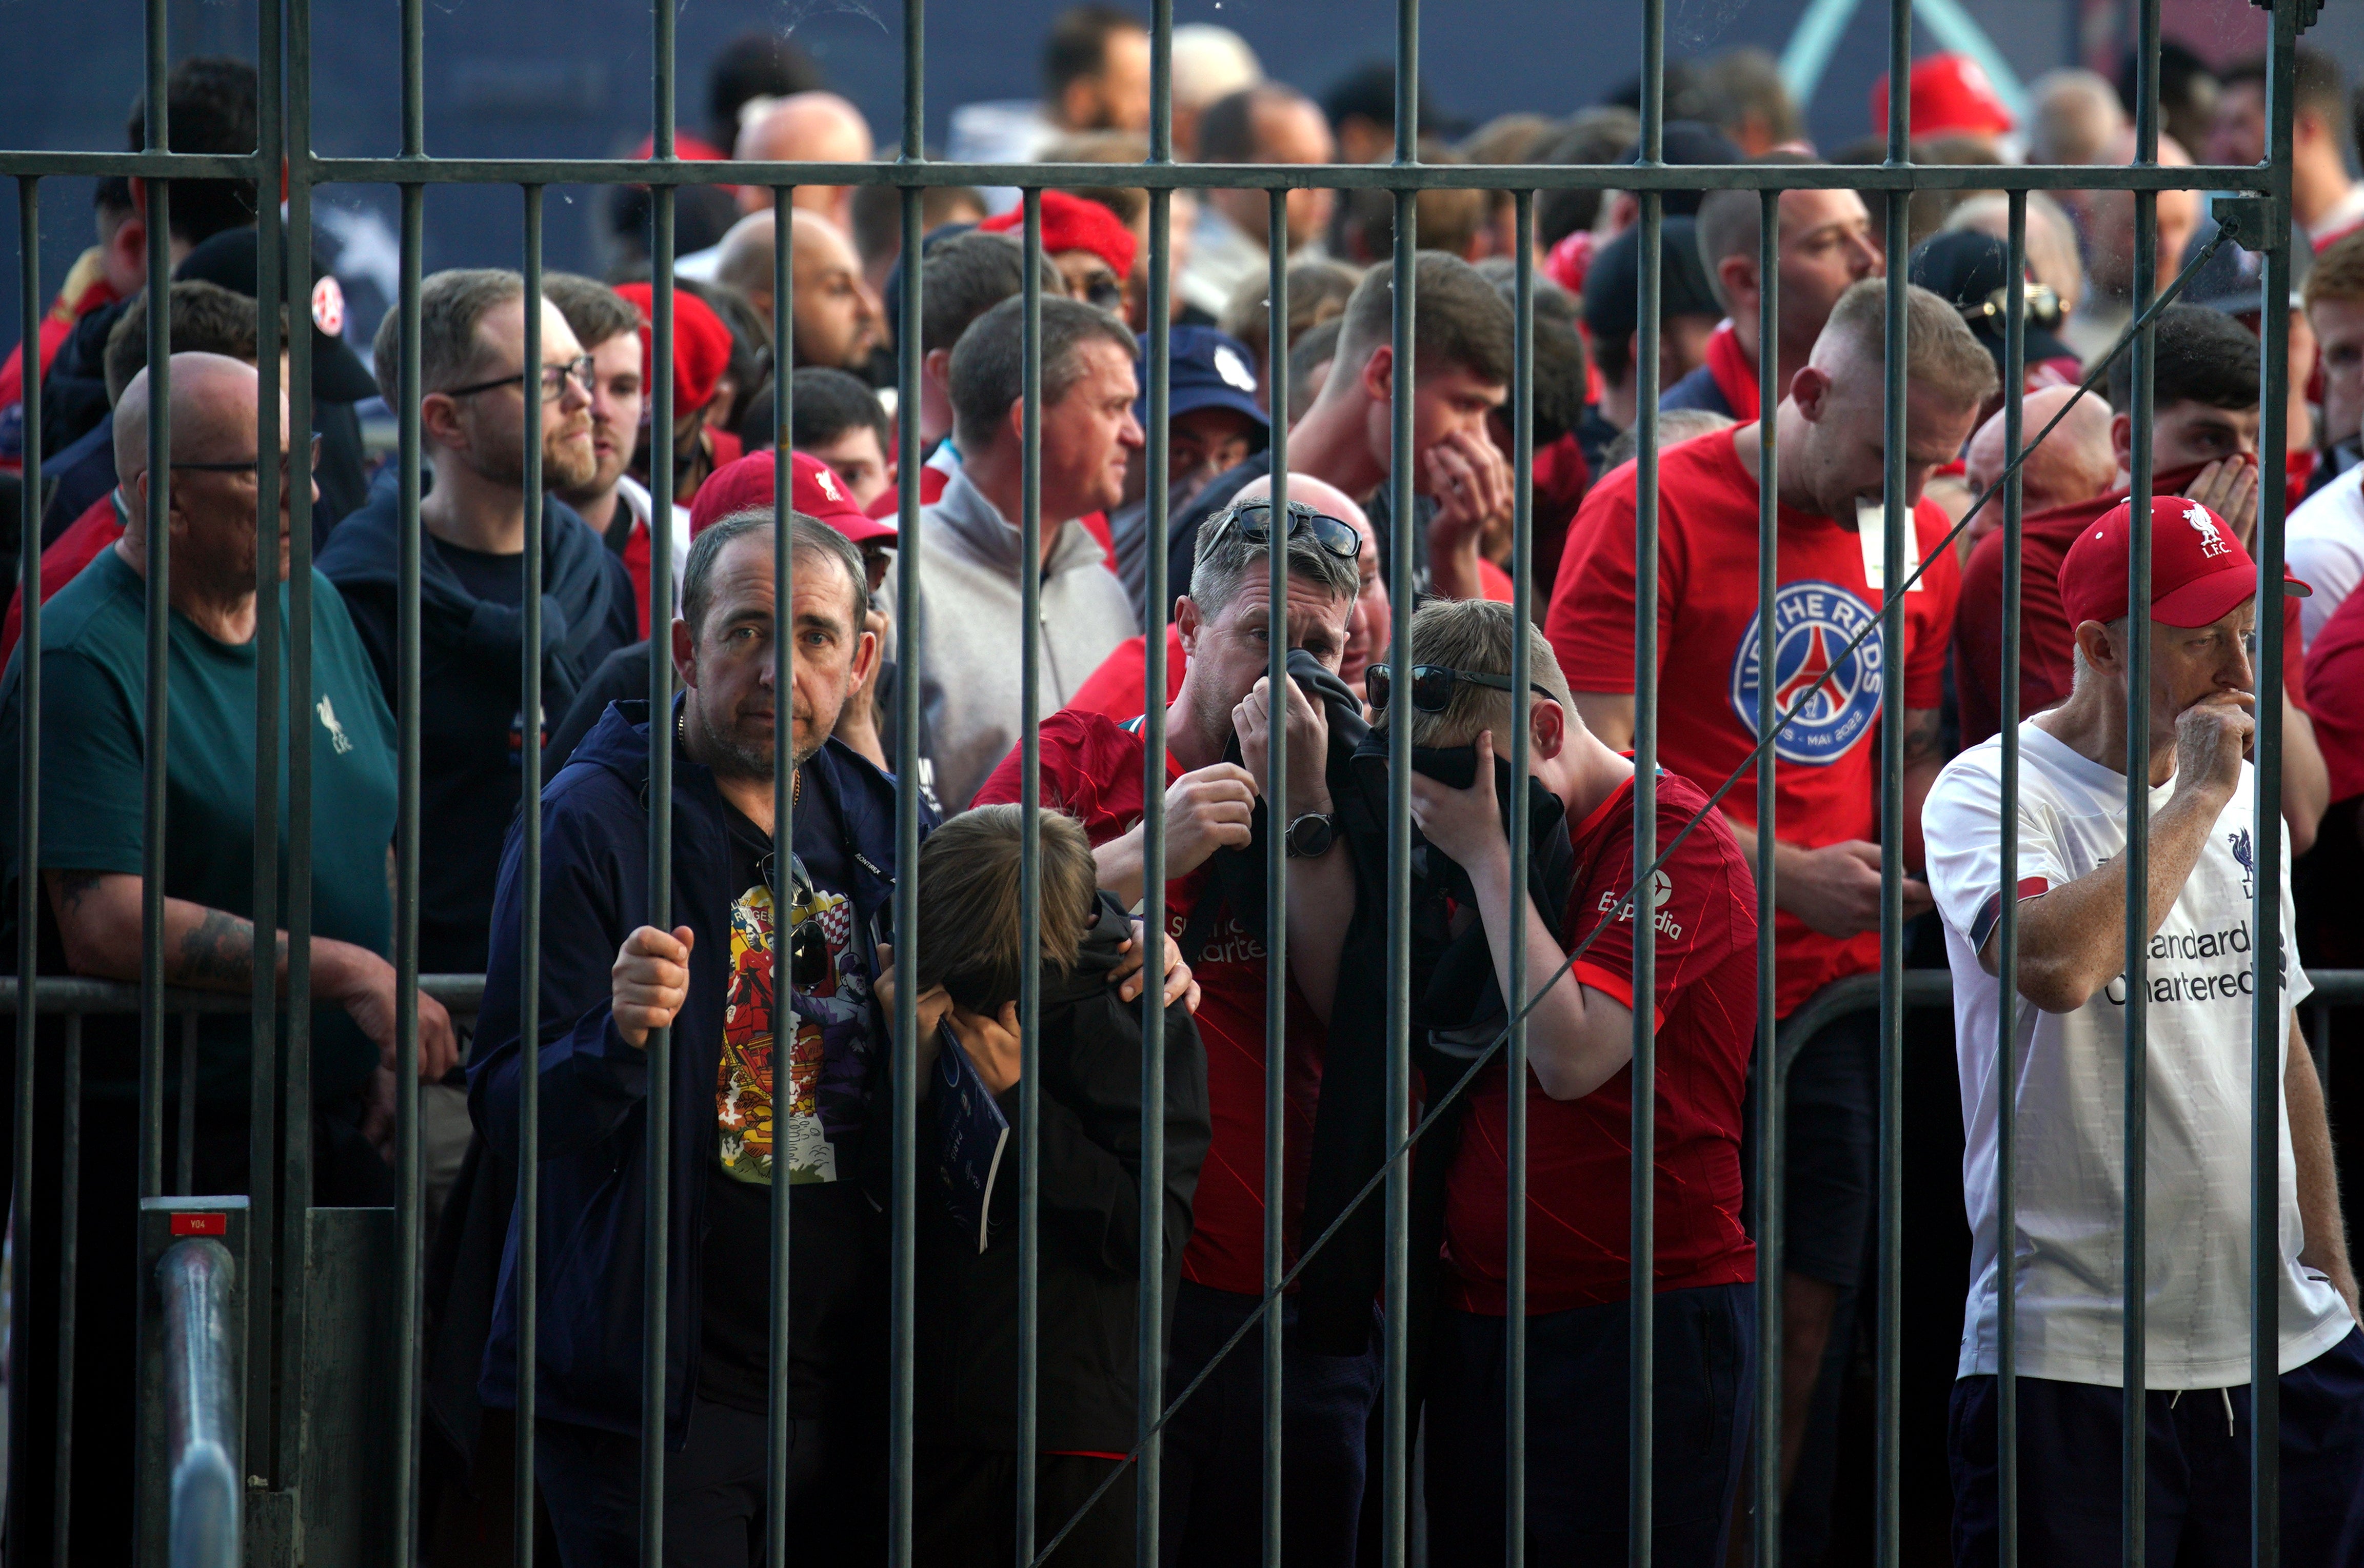 Liverpool fans cover their mouths and noses as they queue to gain entry to the Stade de France (Peter Byrne/PA)